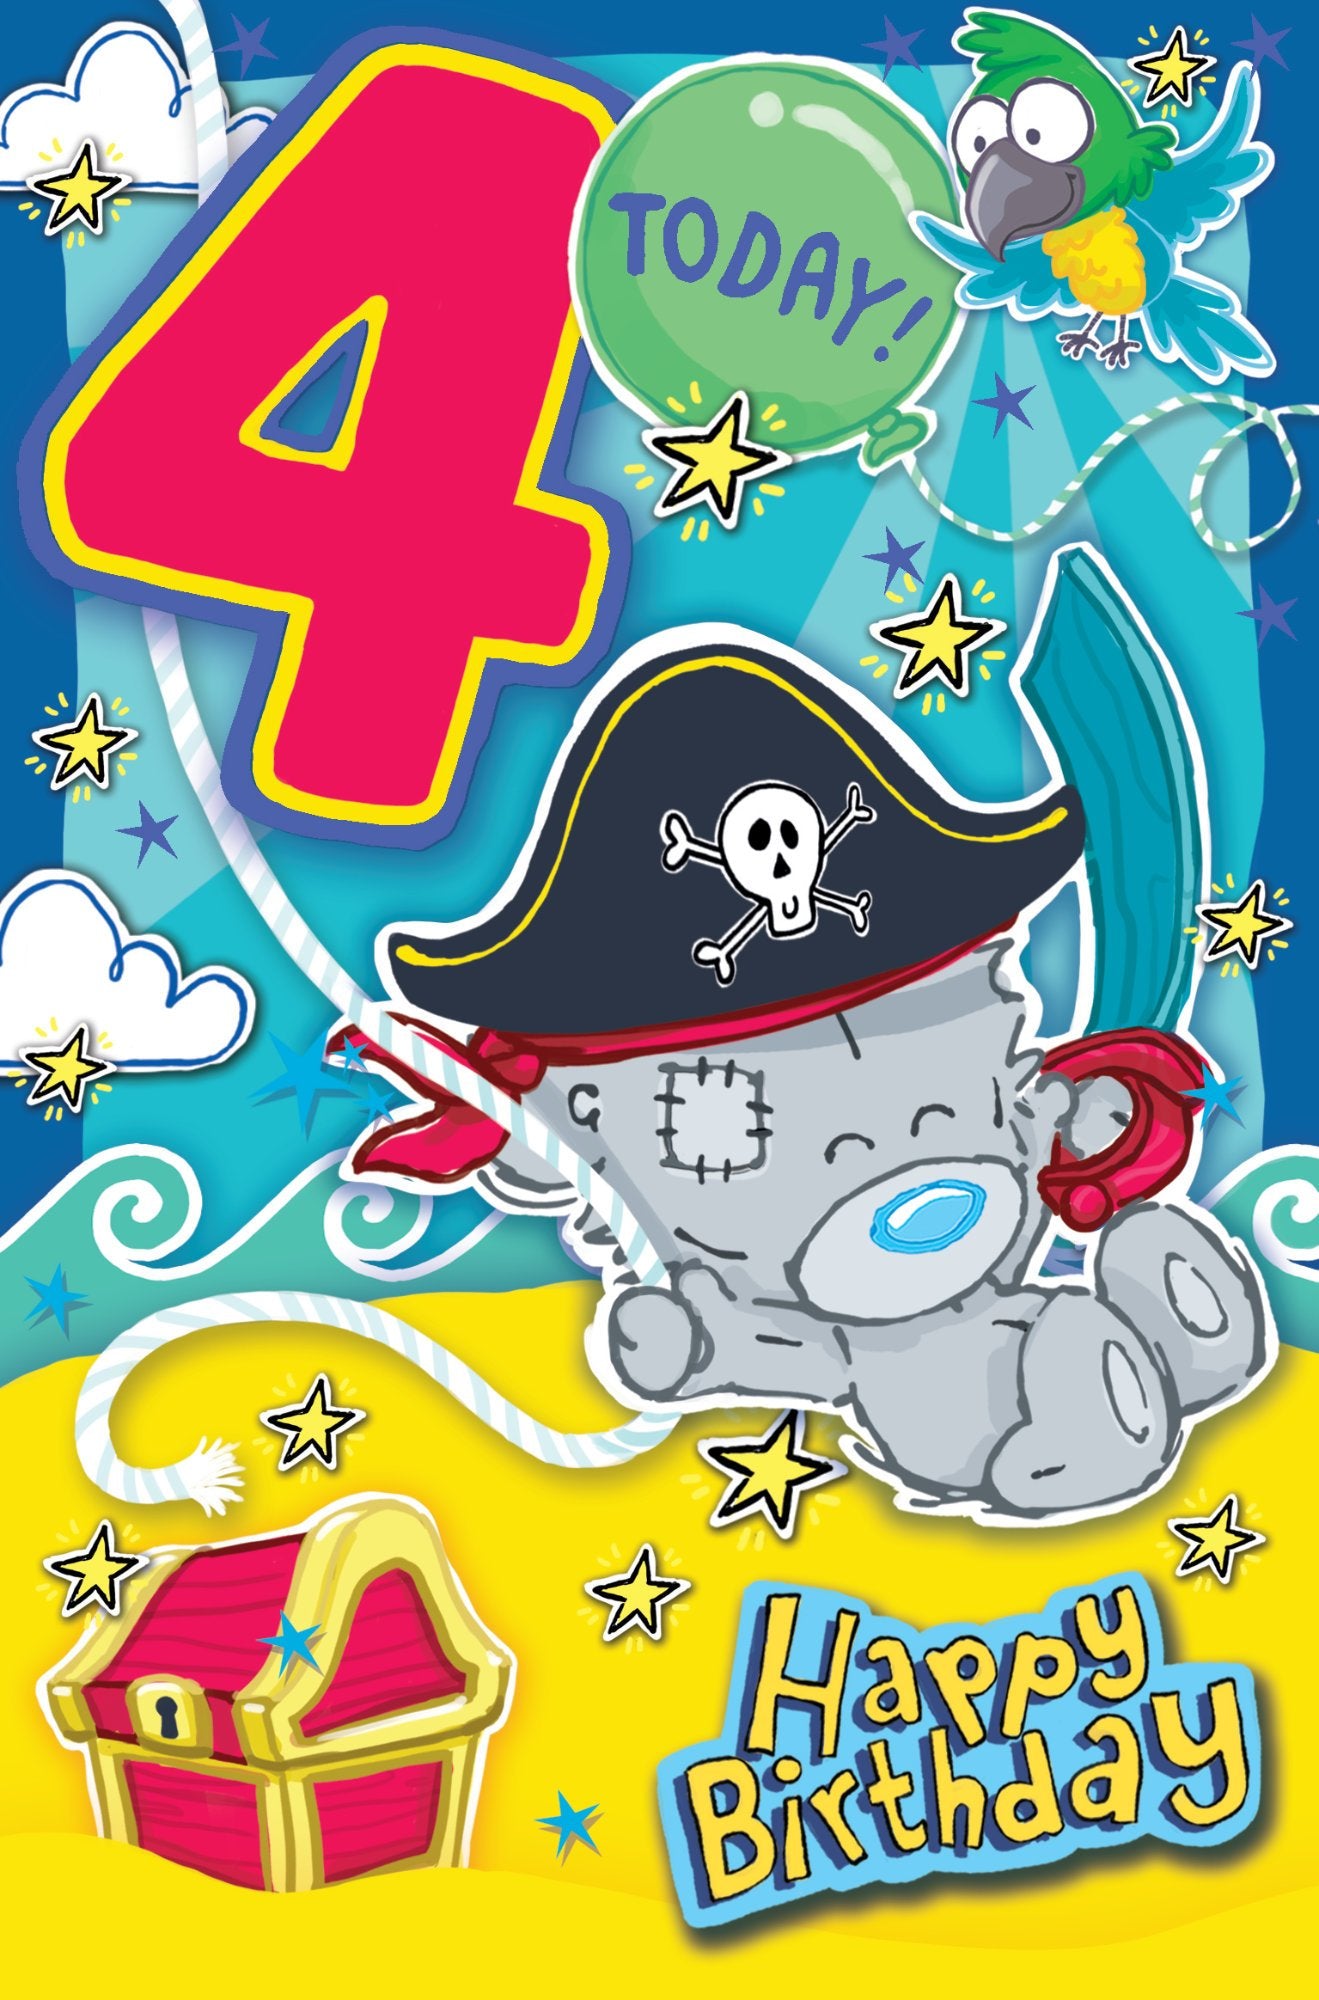 Photograph of 4th Birthday Teddy Pirate Greetings Card at Nicole's Shop